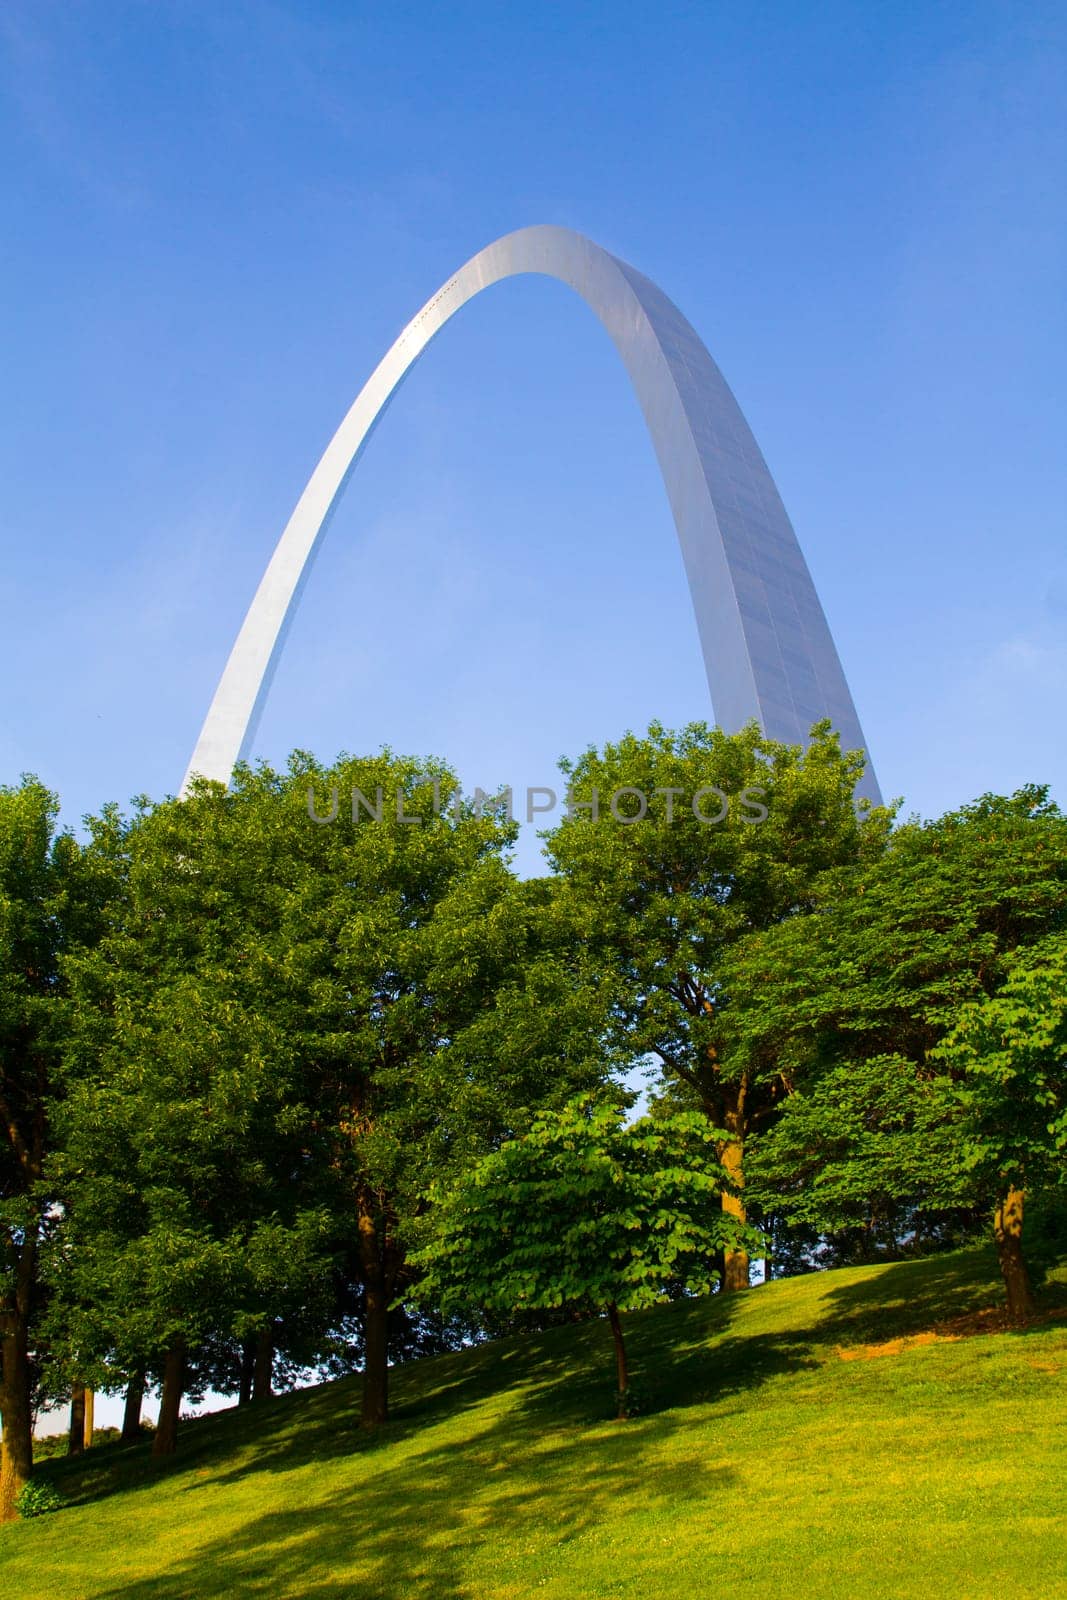 Iconic St. Louis Arch stands tall in lush park, a symbol of human achievement blending harmoniously with natures beauty. Perfect for travel, landmarks, and architectural themes.